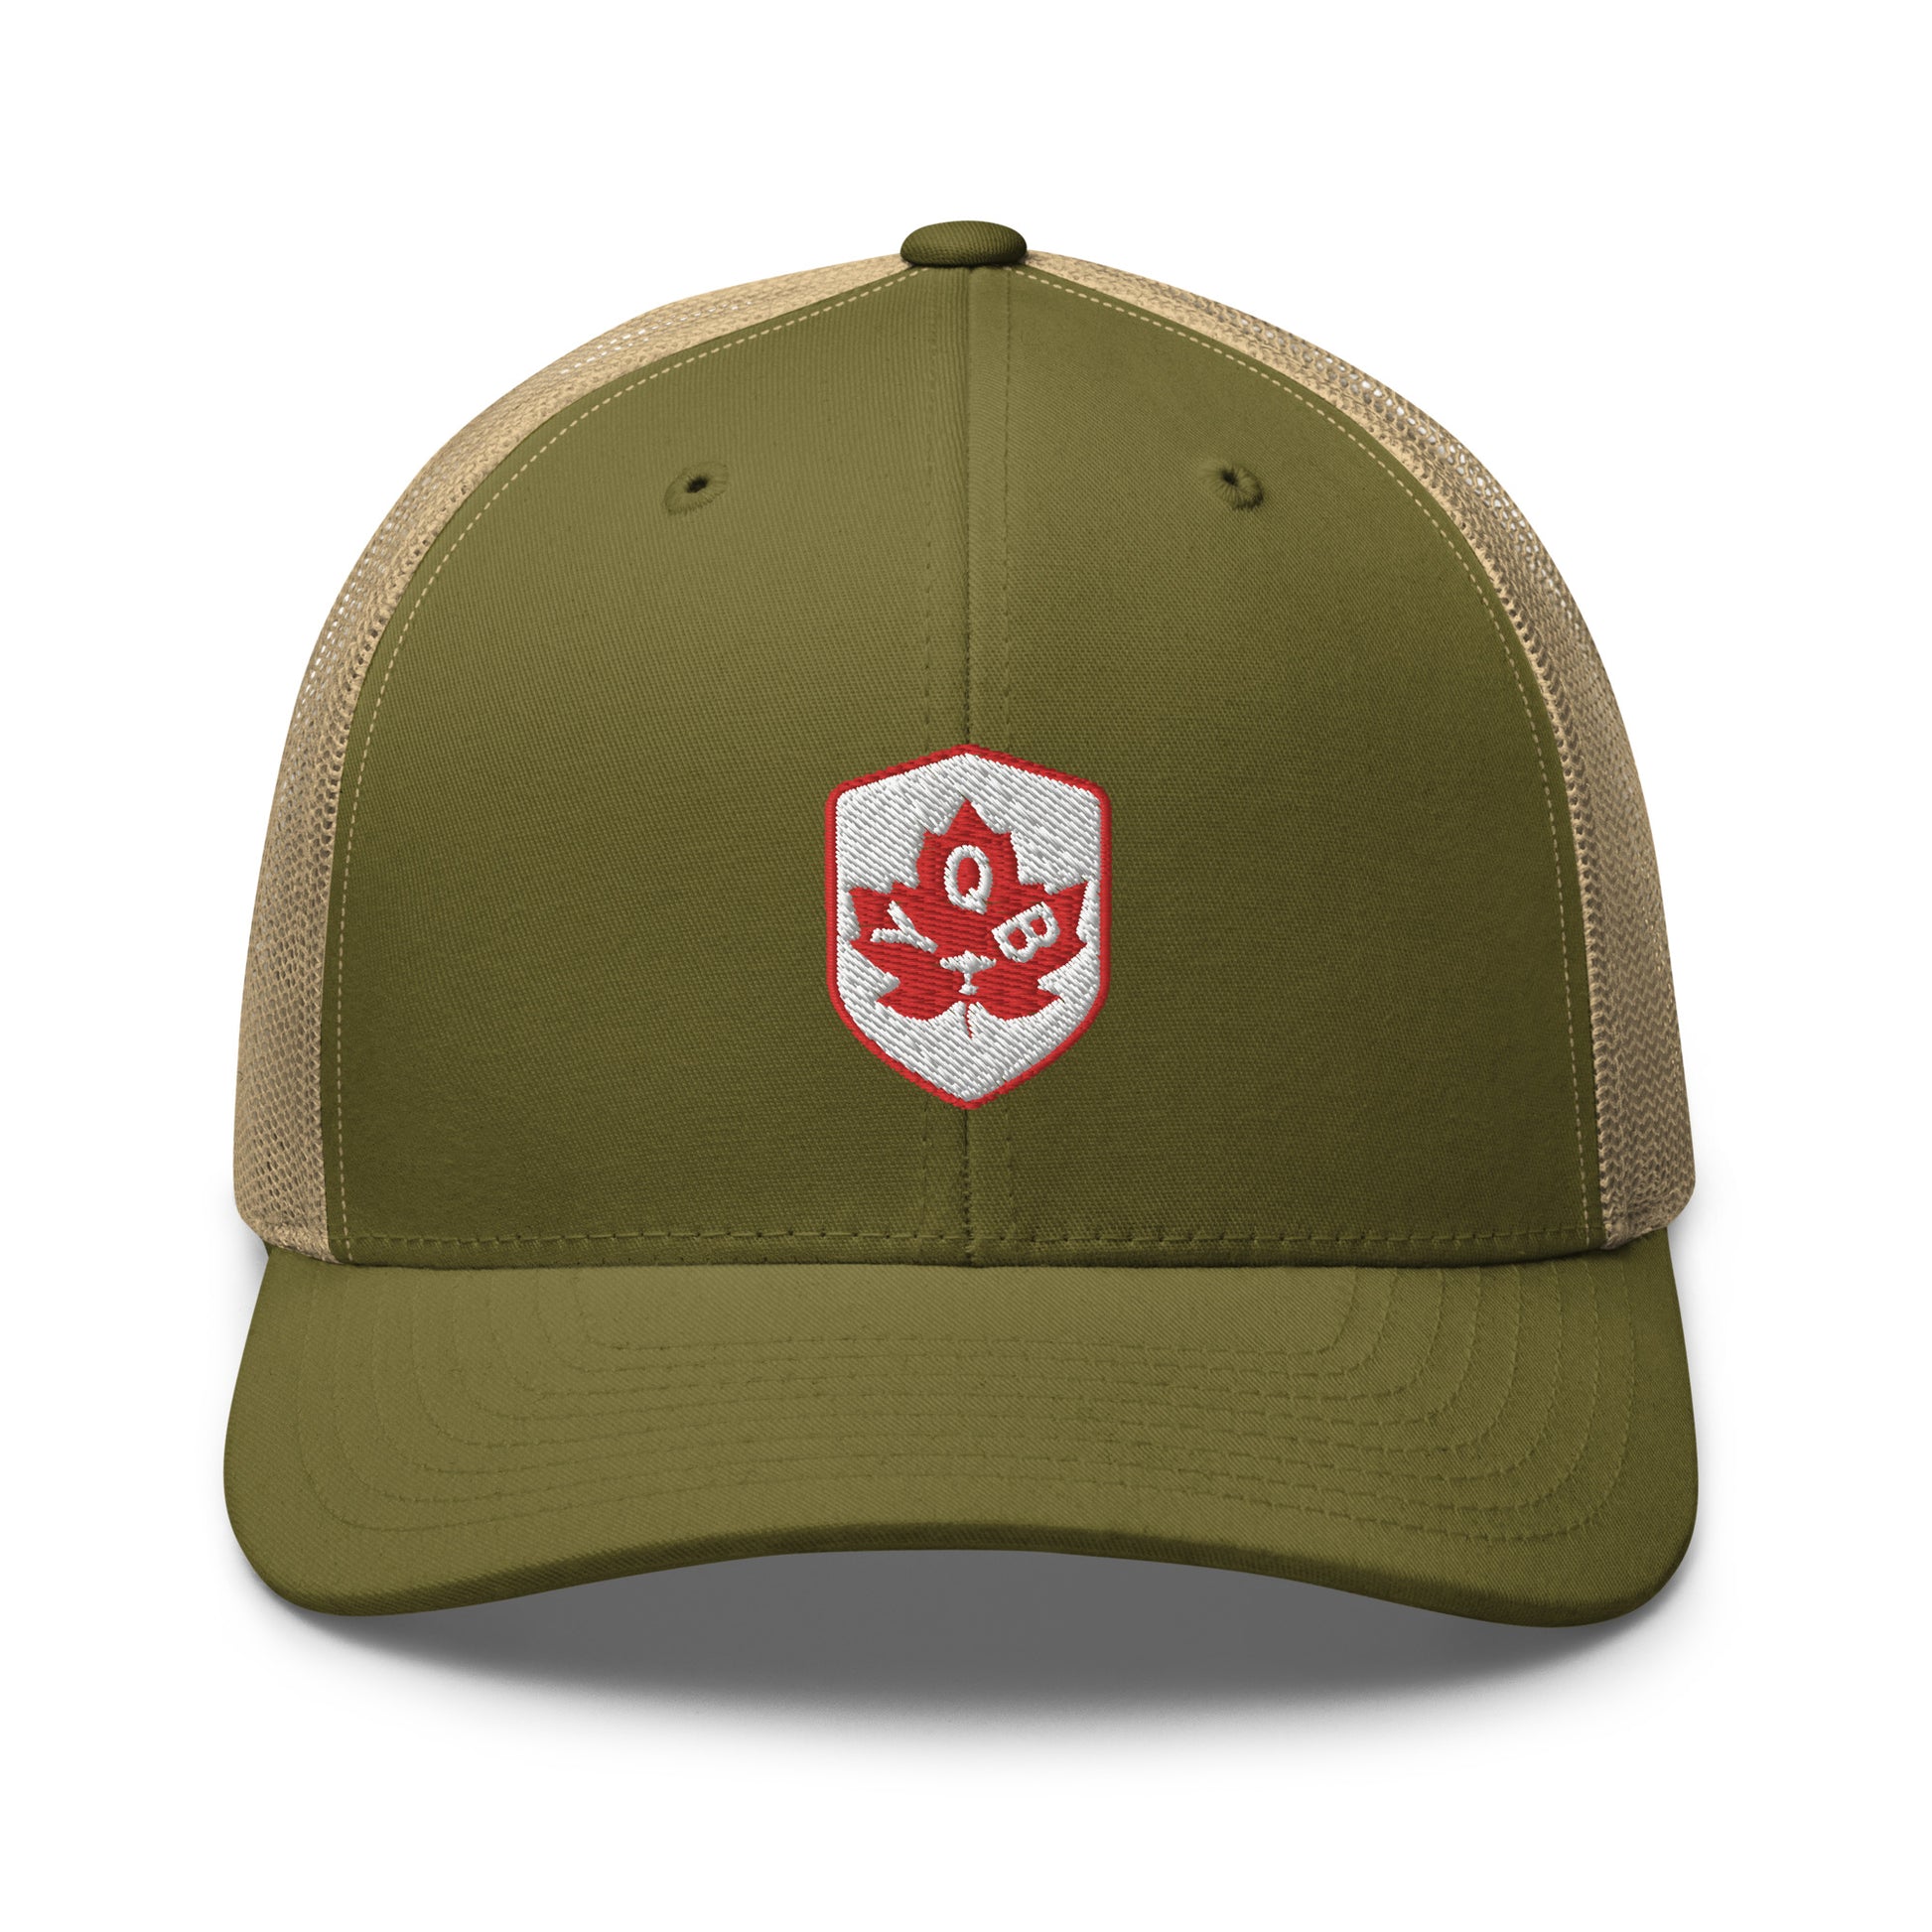 Maple Leaf Trucker Hat - Red/White • YQB Quebec City • YHM Designs - Image 29